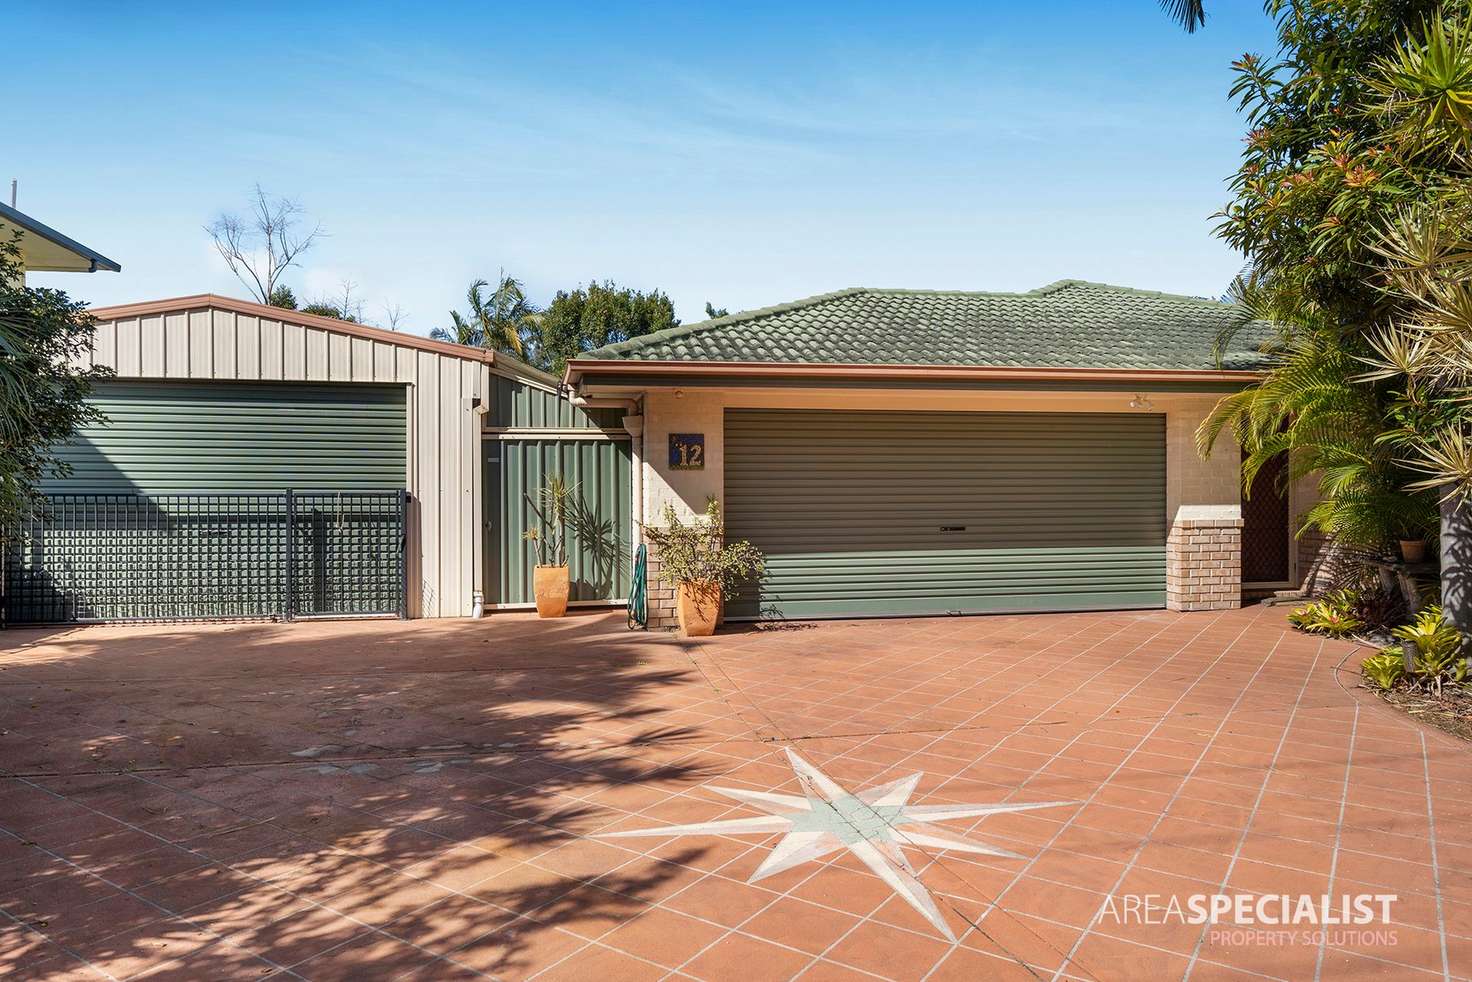 Main view of Homely house listing, 12 Karen Street, Jacobs Well QLD 4208